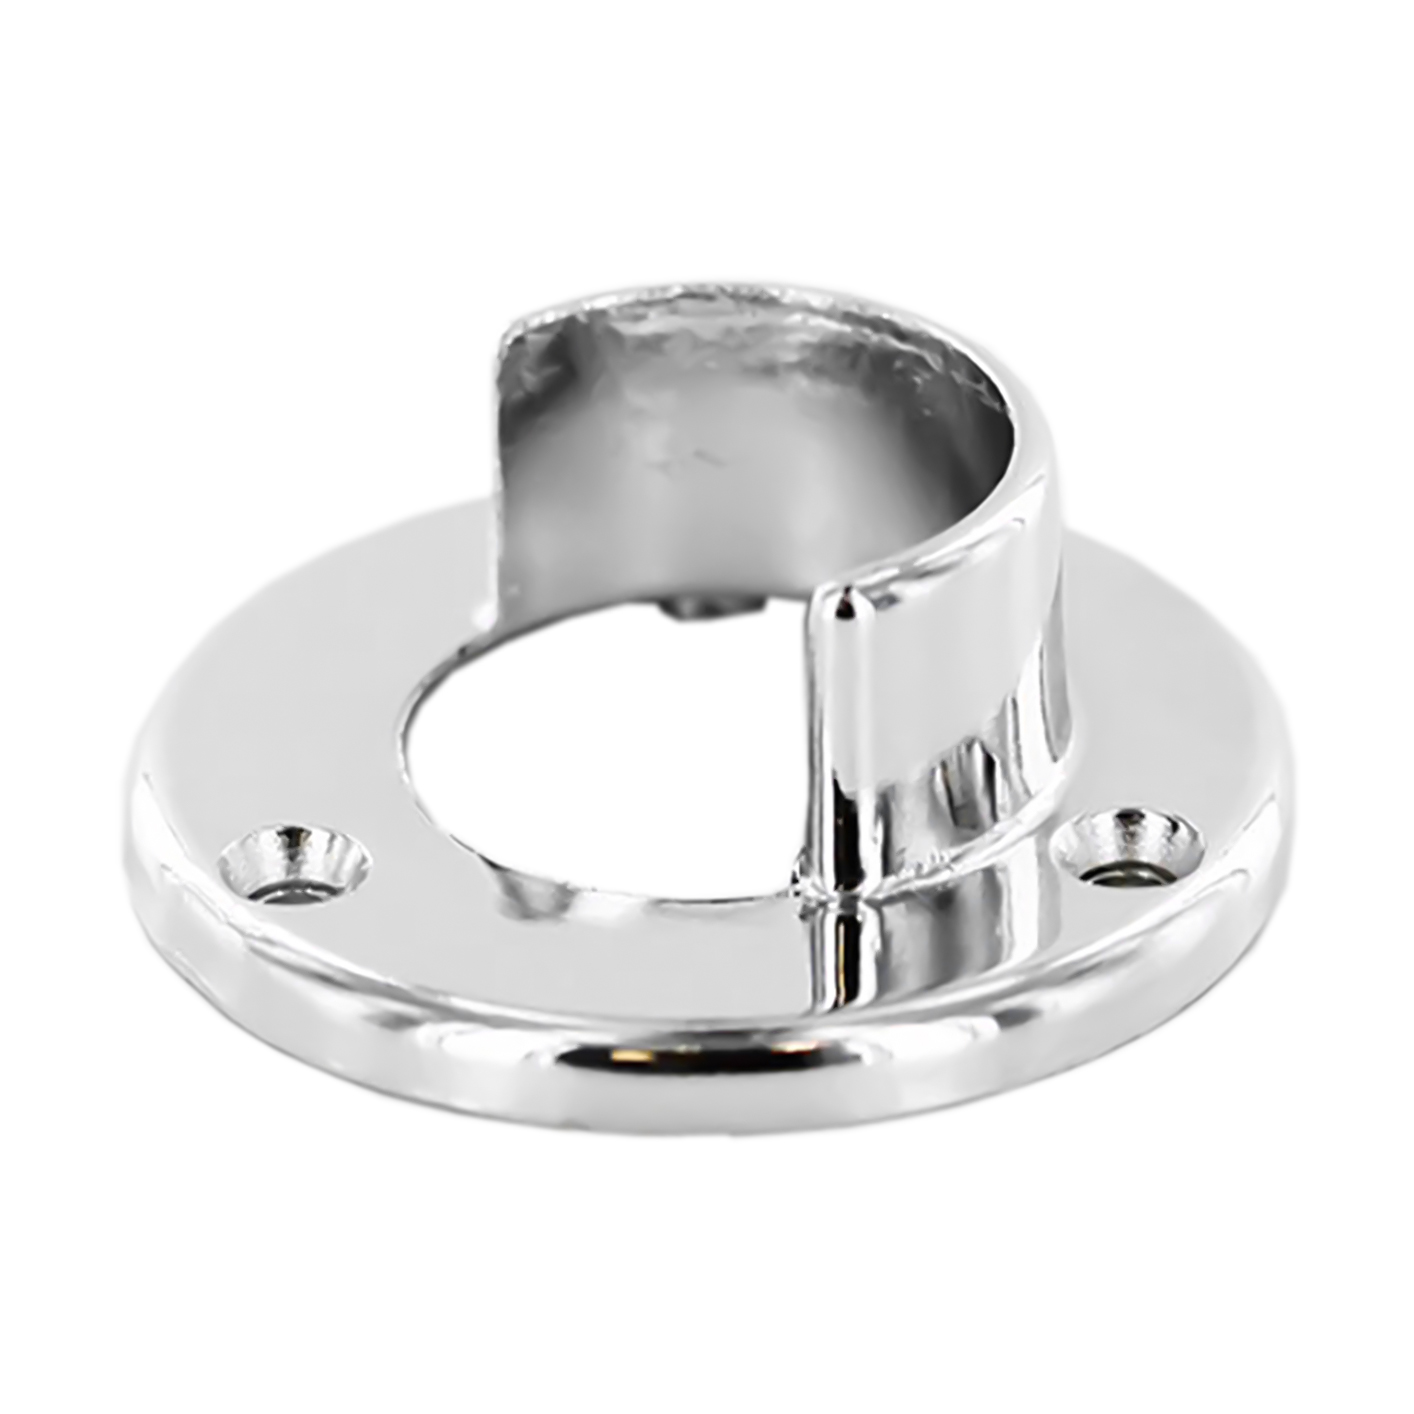 Closet Rod Holder for 12 ft Round Rods, 1-1/4 in, Open End, Chrome